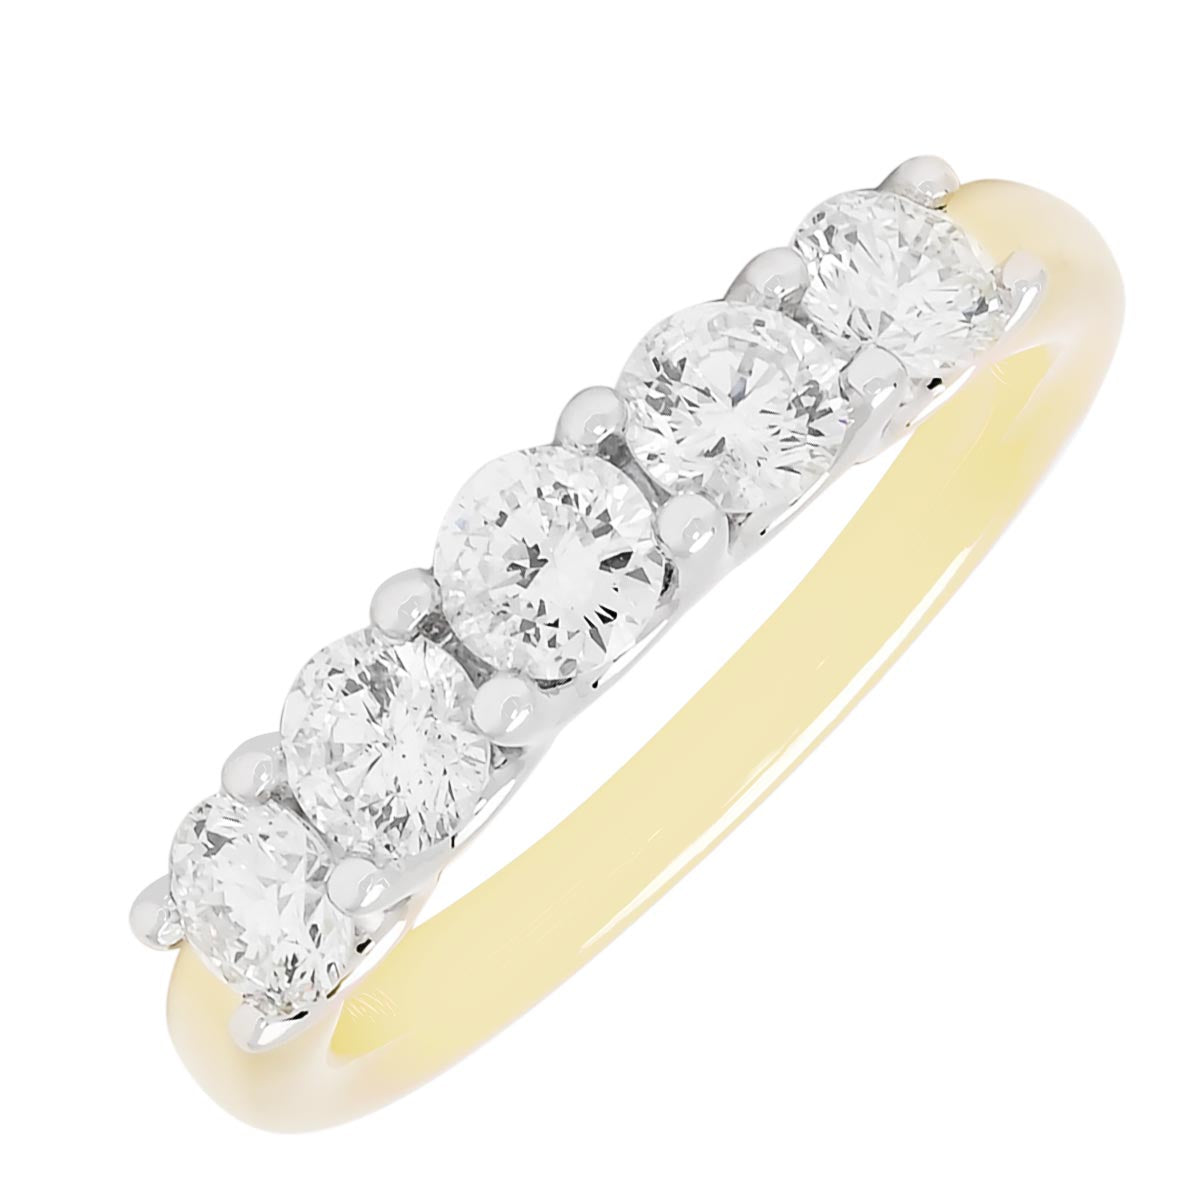 Northern Star Five Diamond Band in 14kt Yellow Gold (1ct tw)